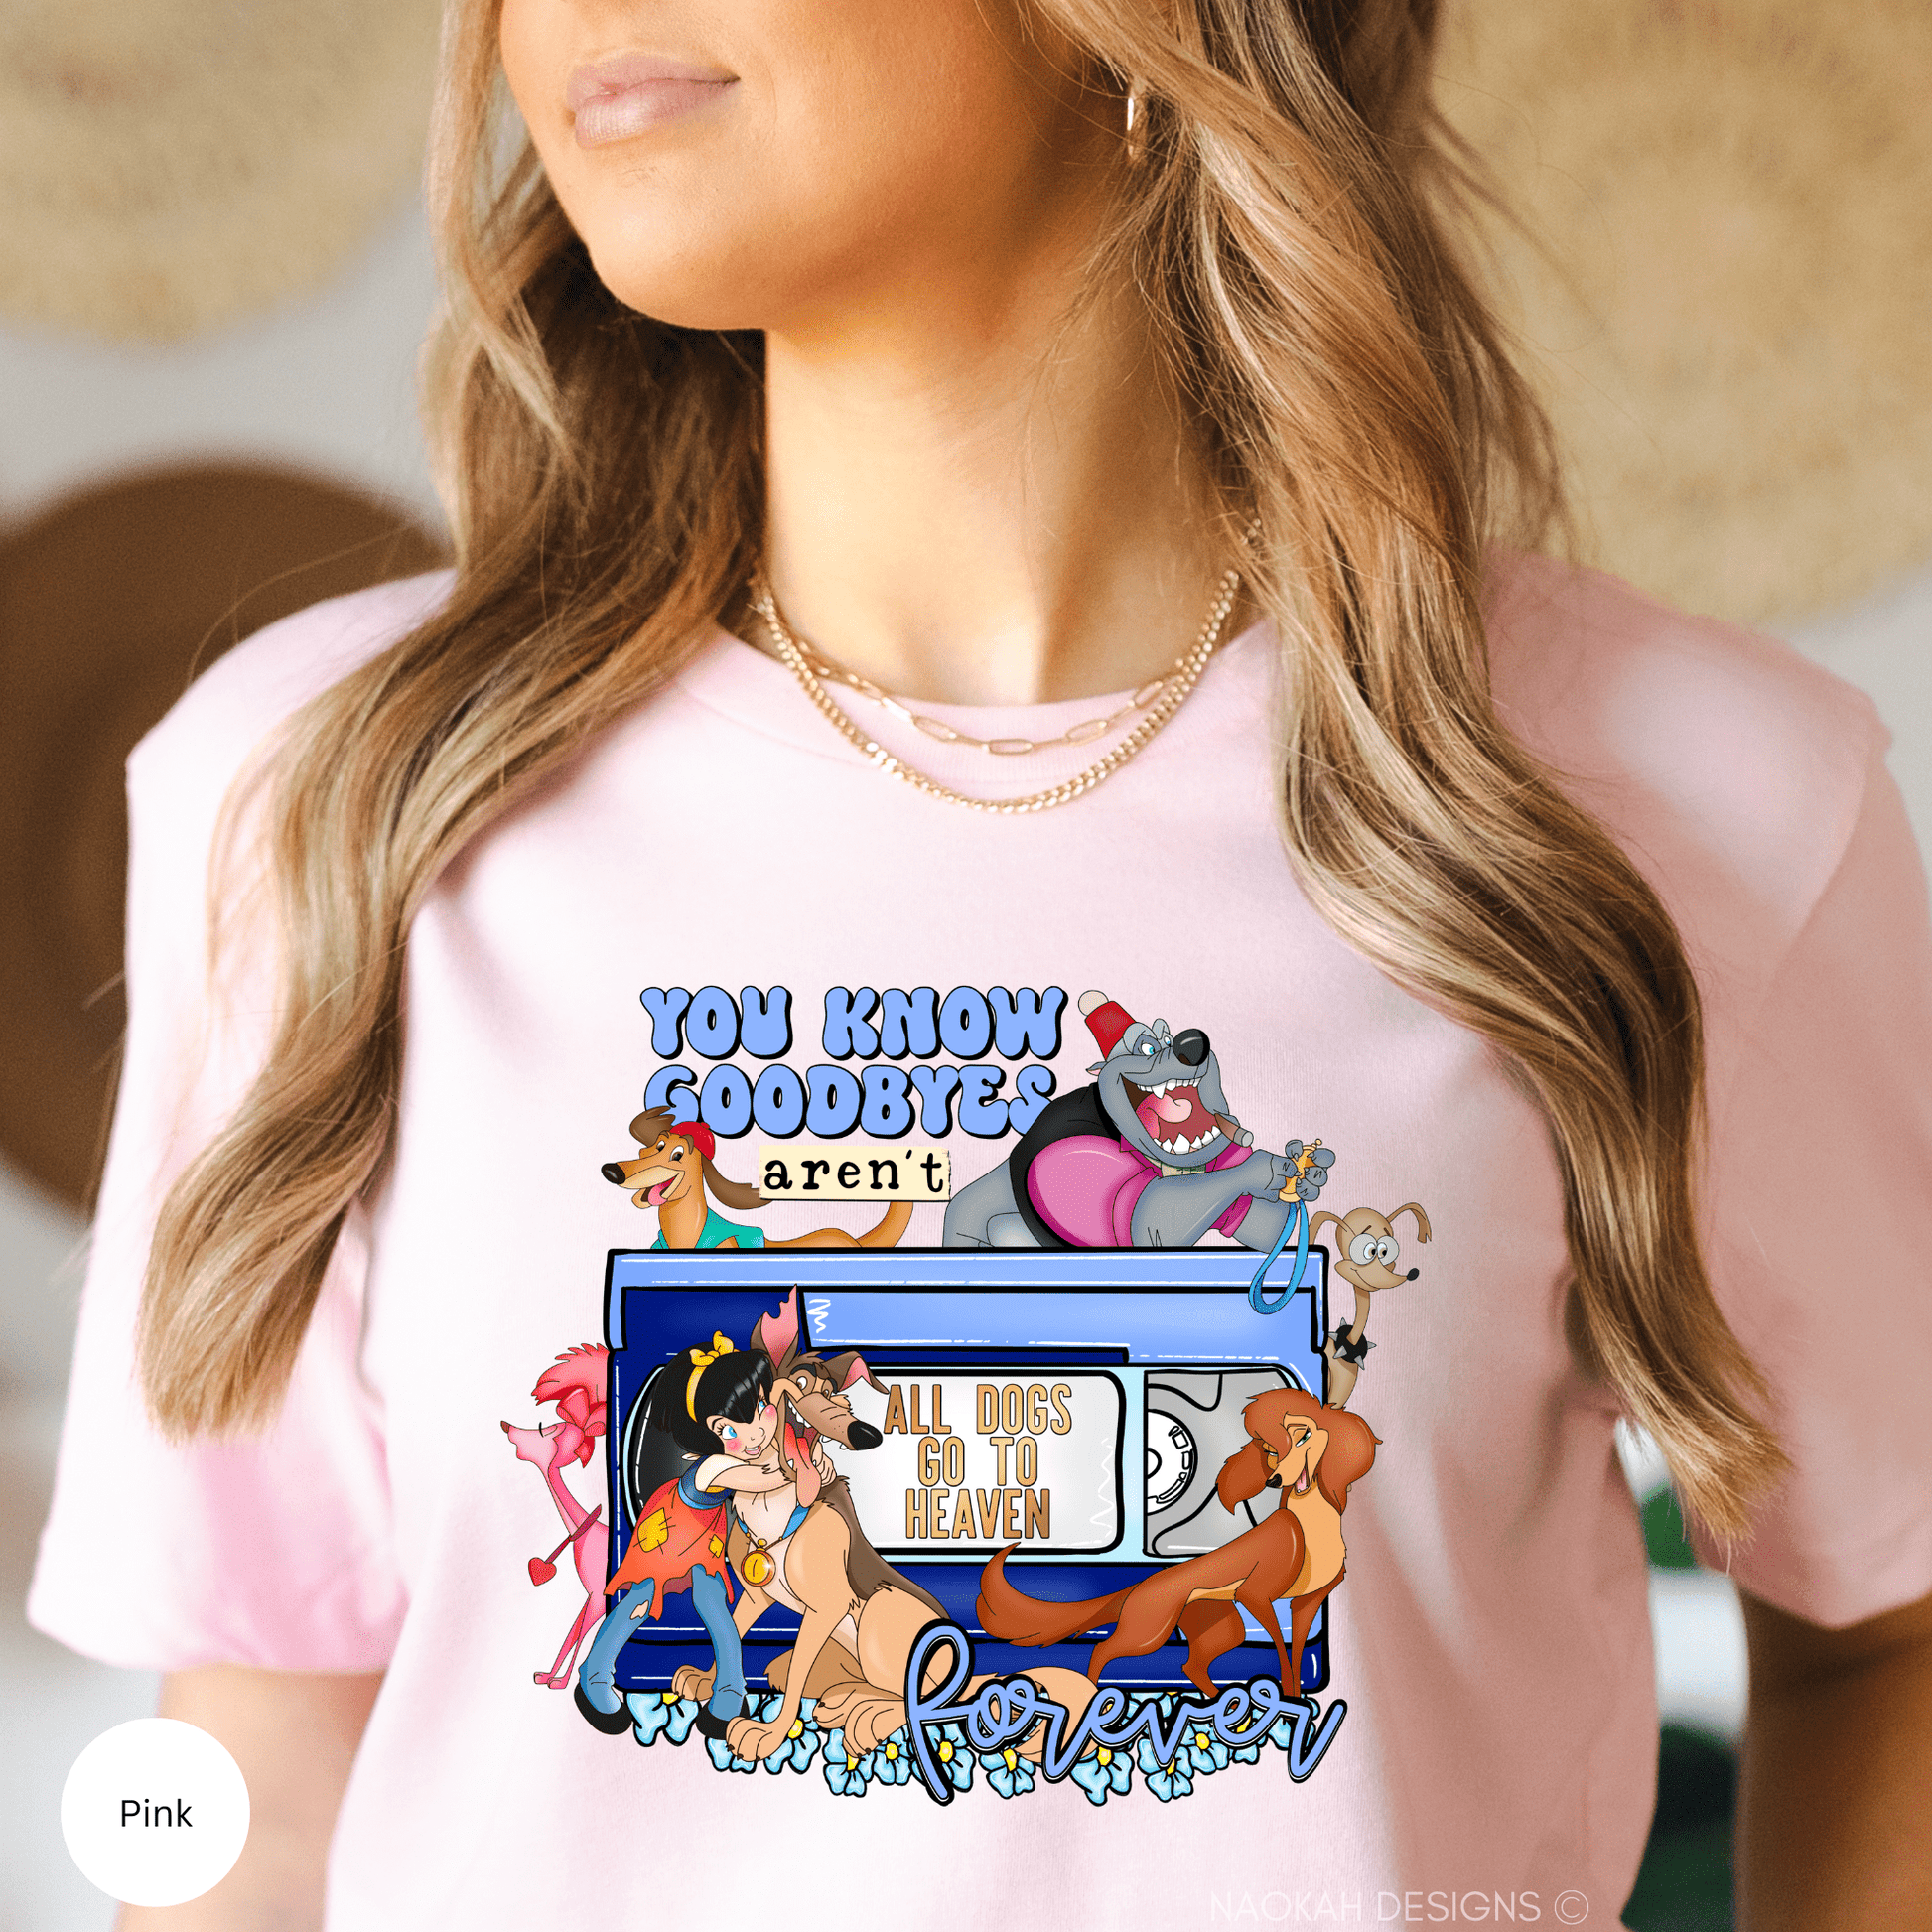 You Know Goodbyes Aren't Forever Shirt, All Dogs Go To Heaven, Fairytale Shirt, Classic Movie Shirt, Girls Best Friend Tee, Angel Charlie